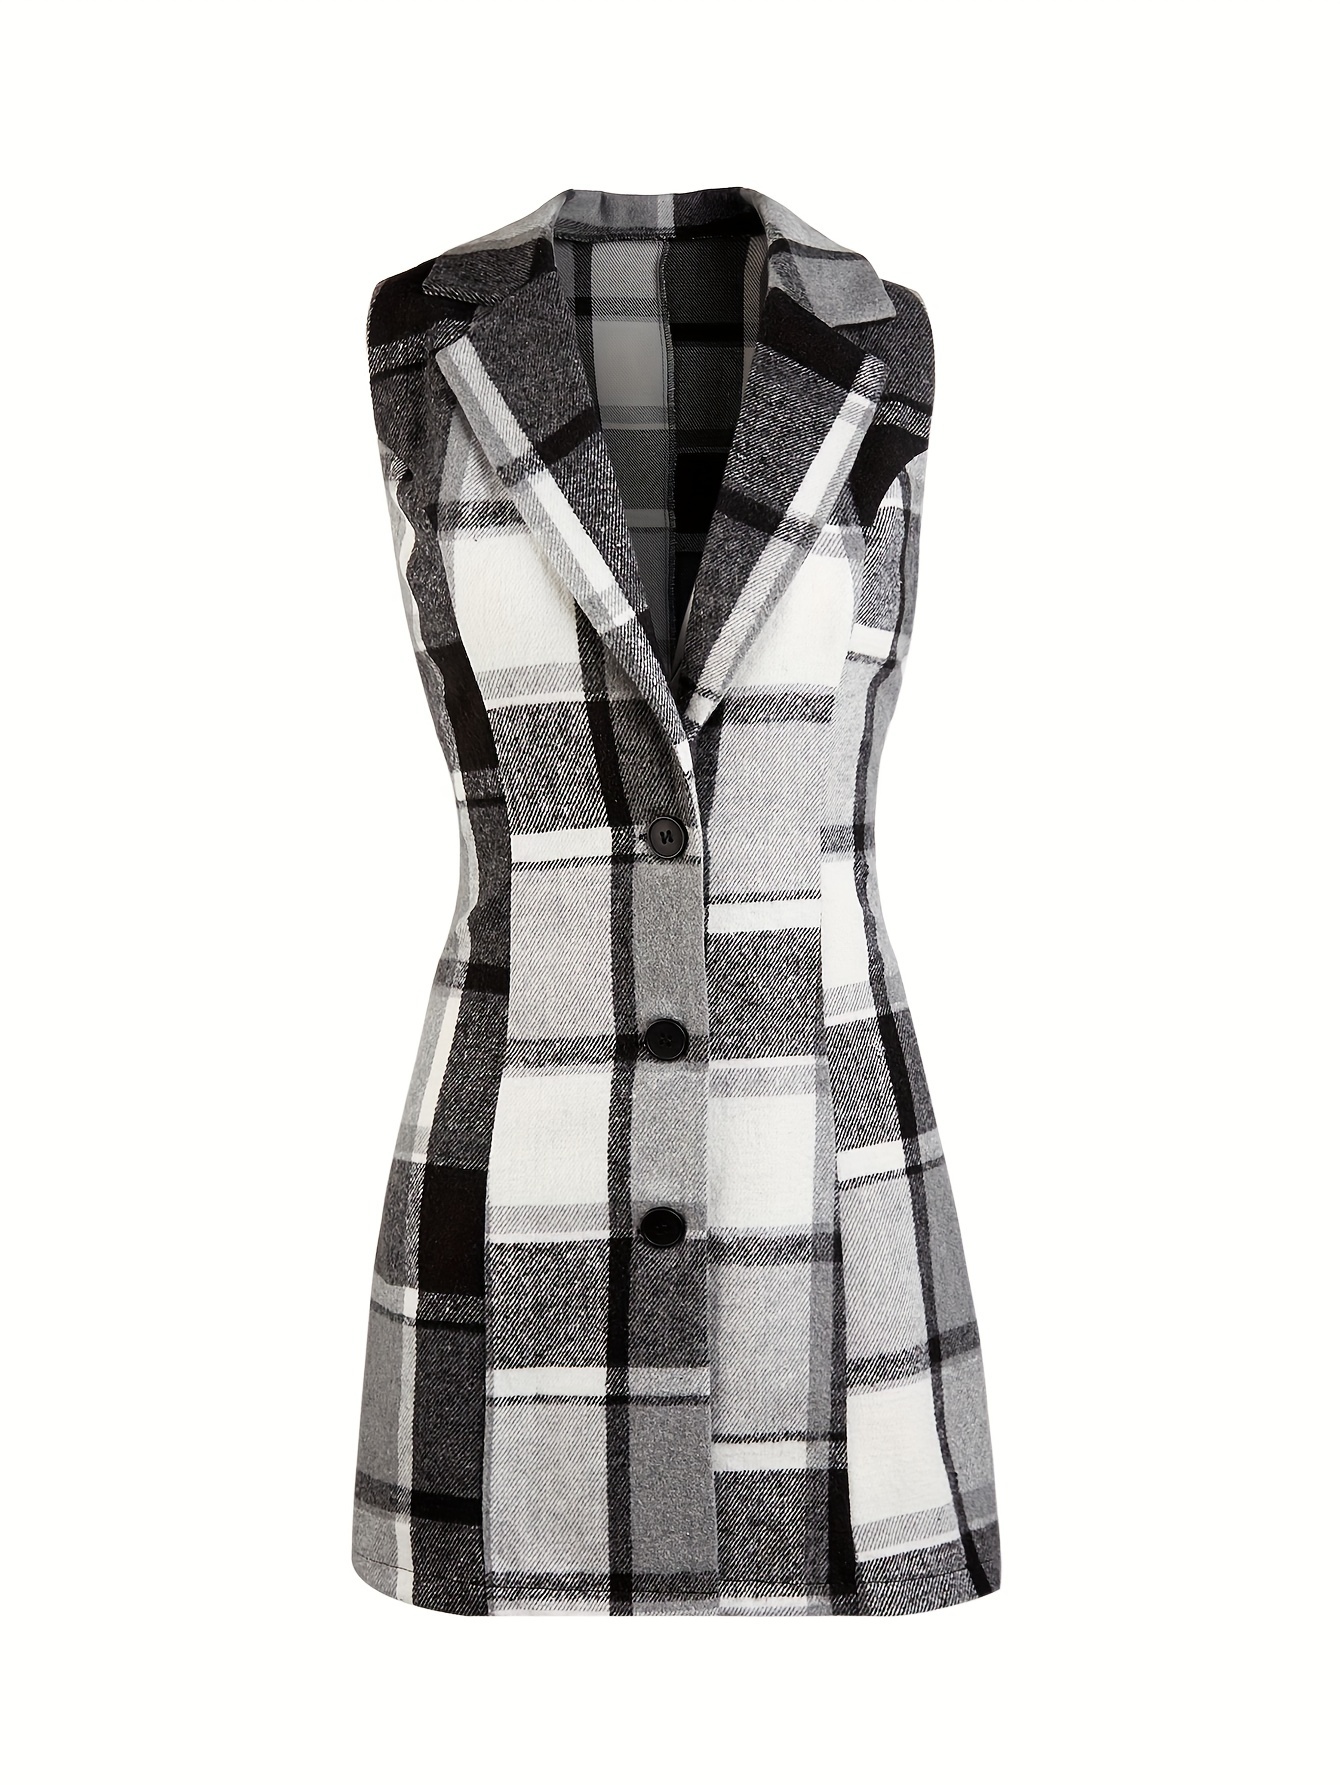 plaid sleeveless lapel blazer casual single breasted outerwear womens clothing details 5